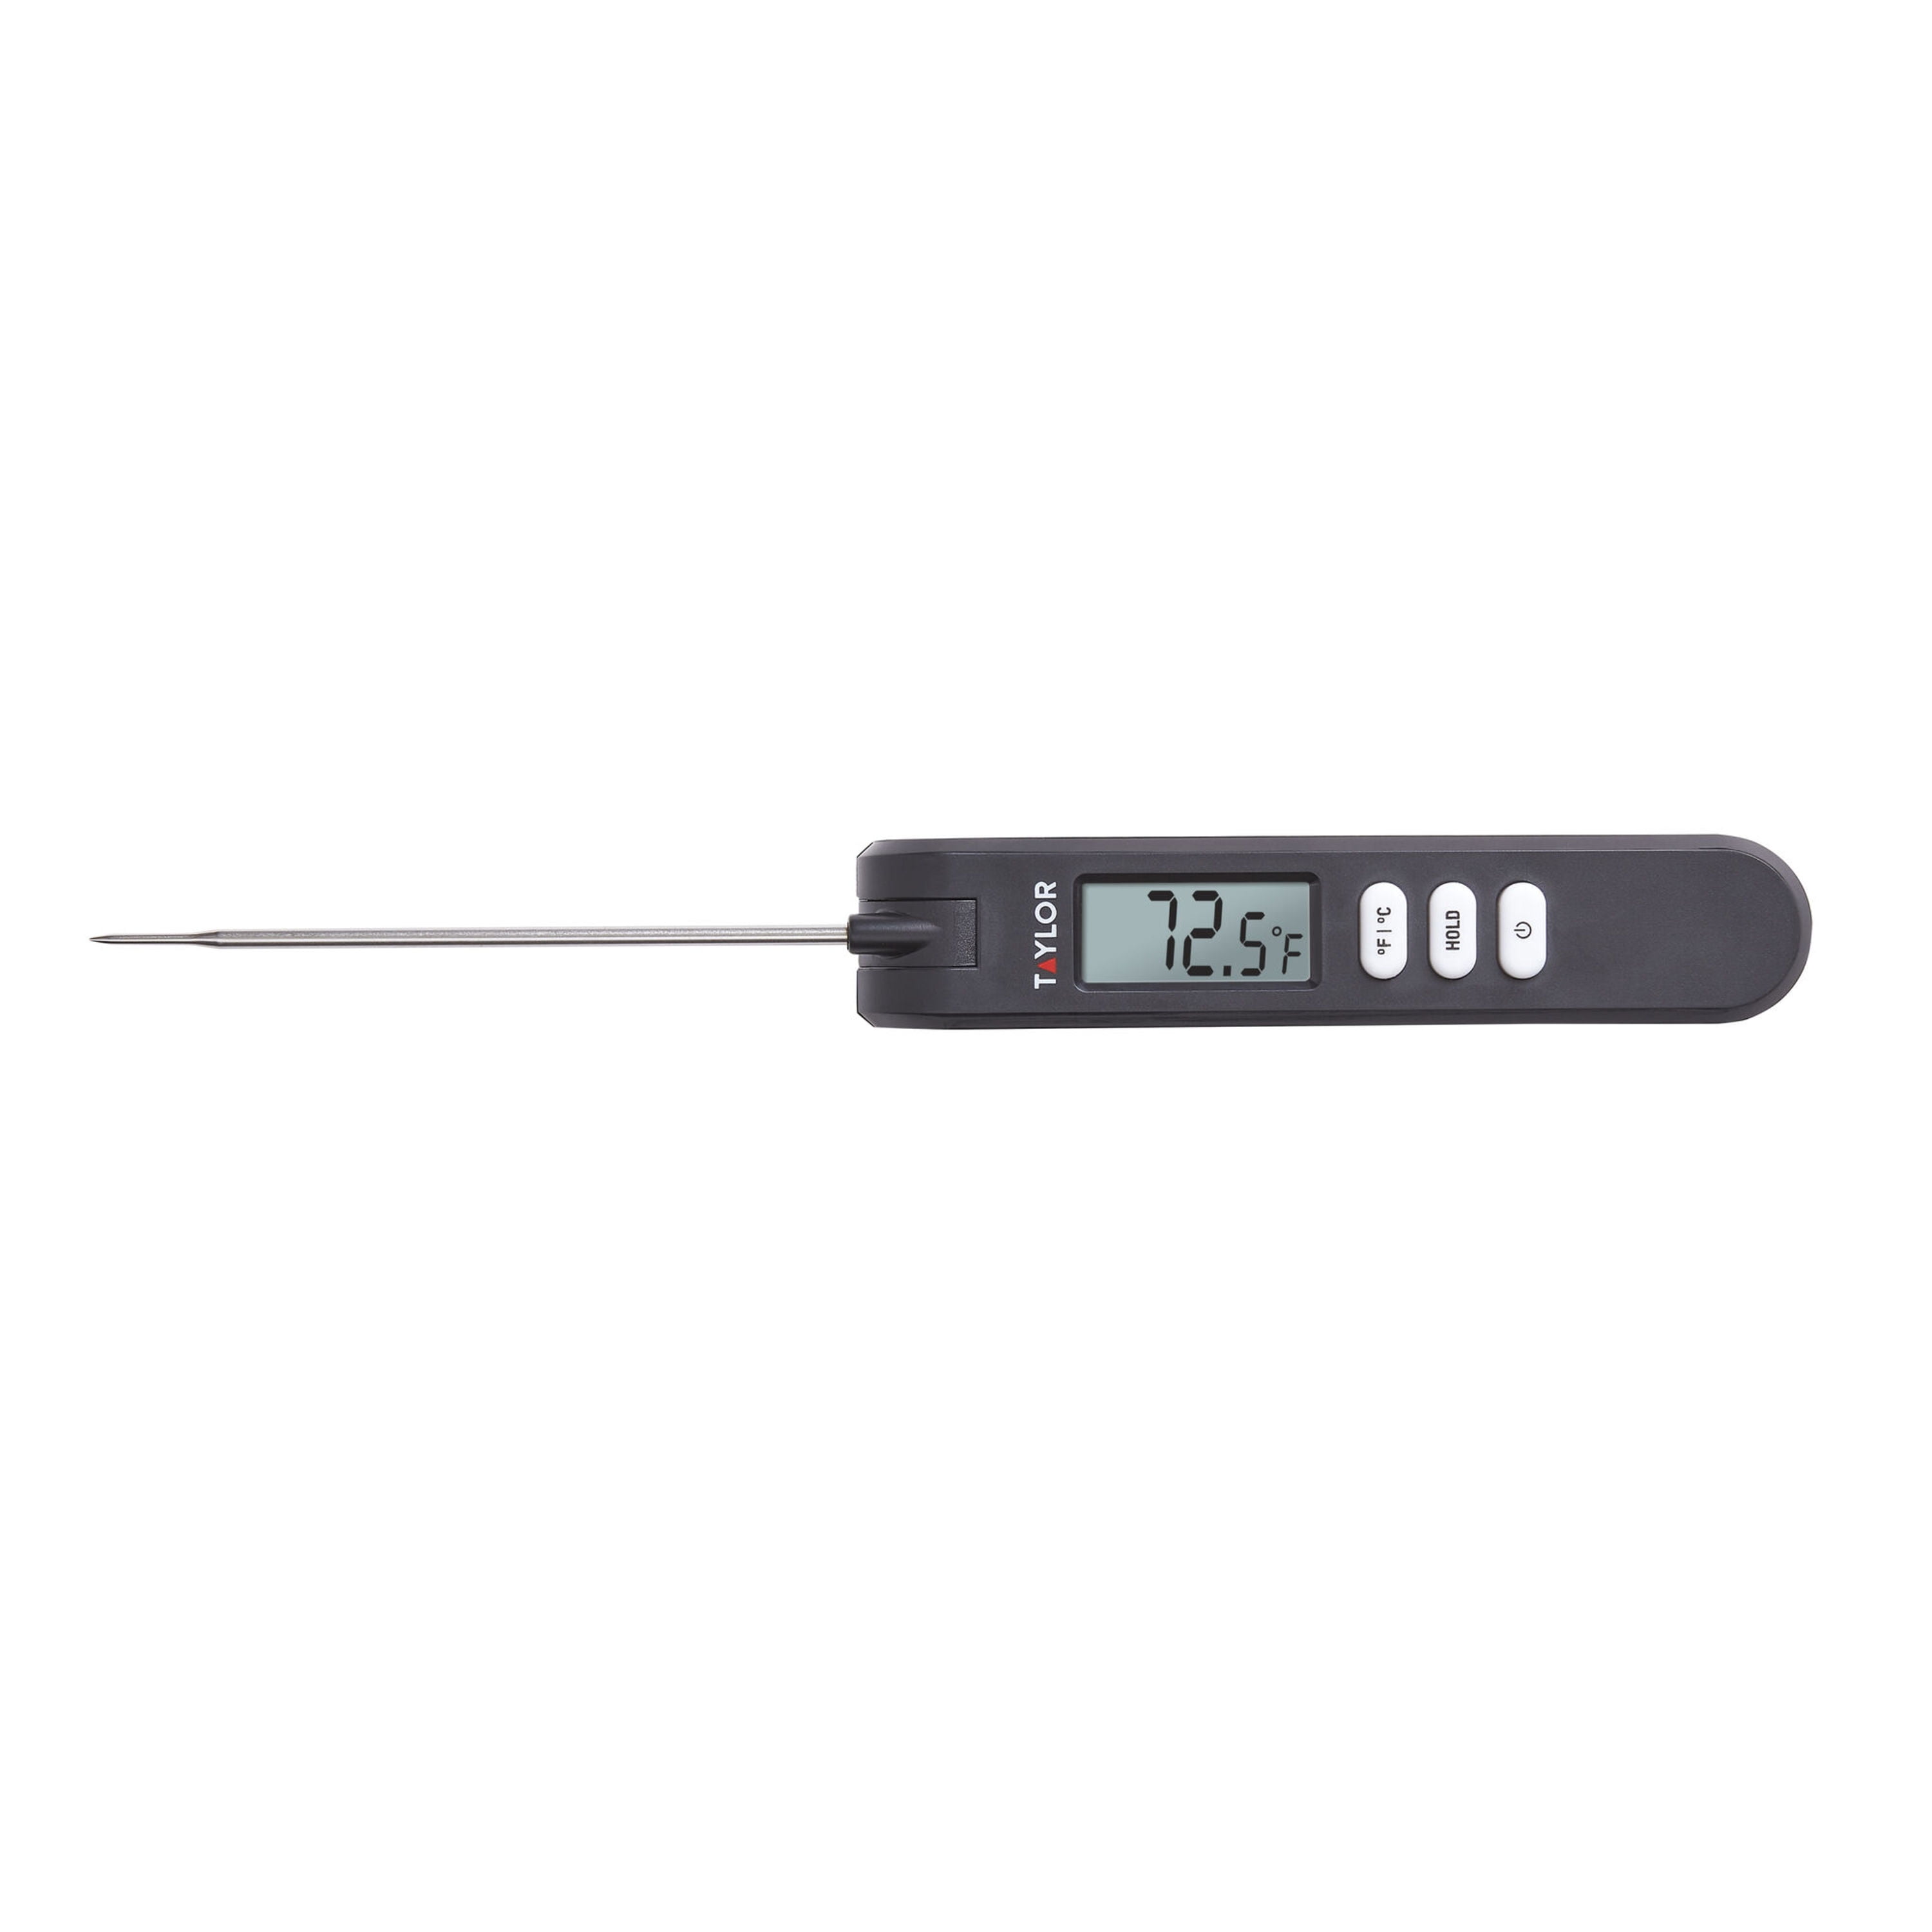 Taylor Digital Fold Thermocouple Thermometer Stainless Steel Probe